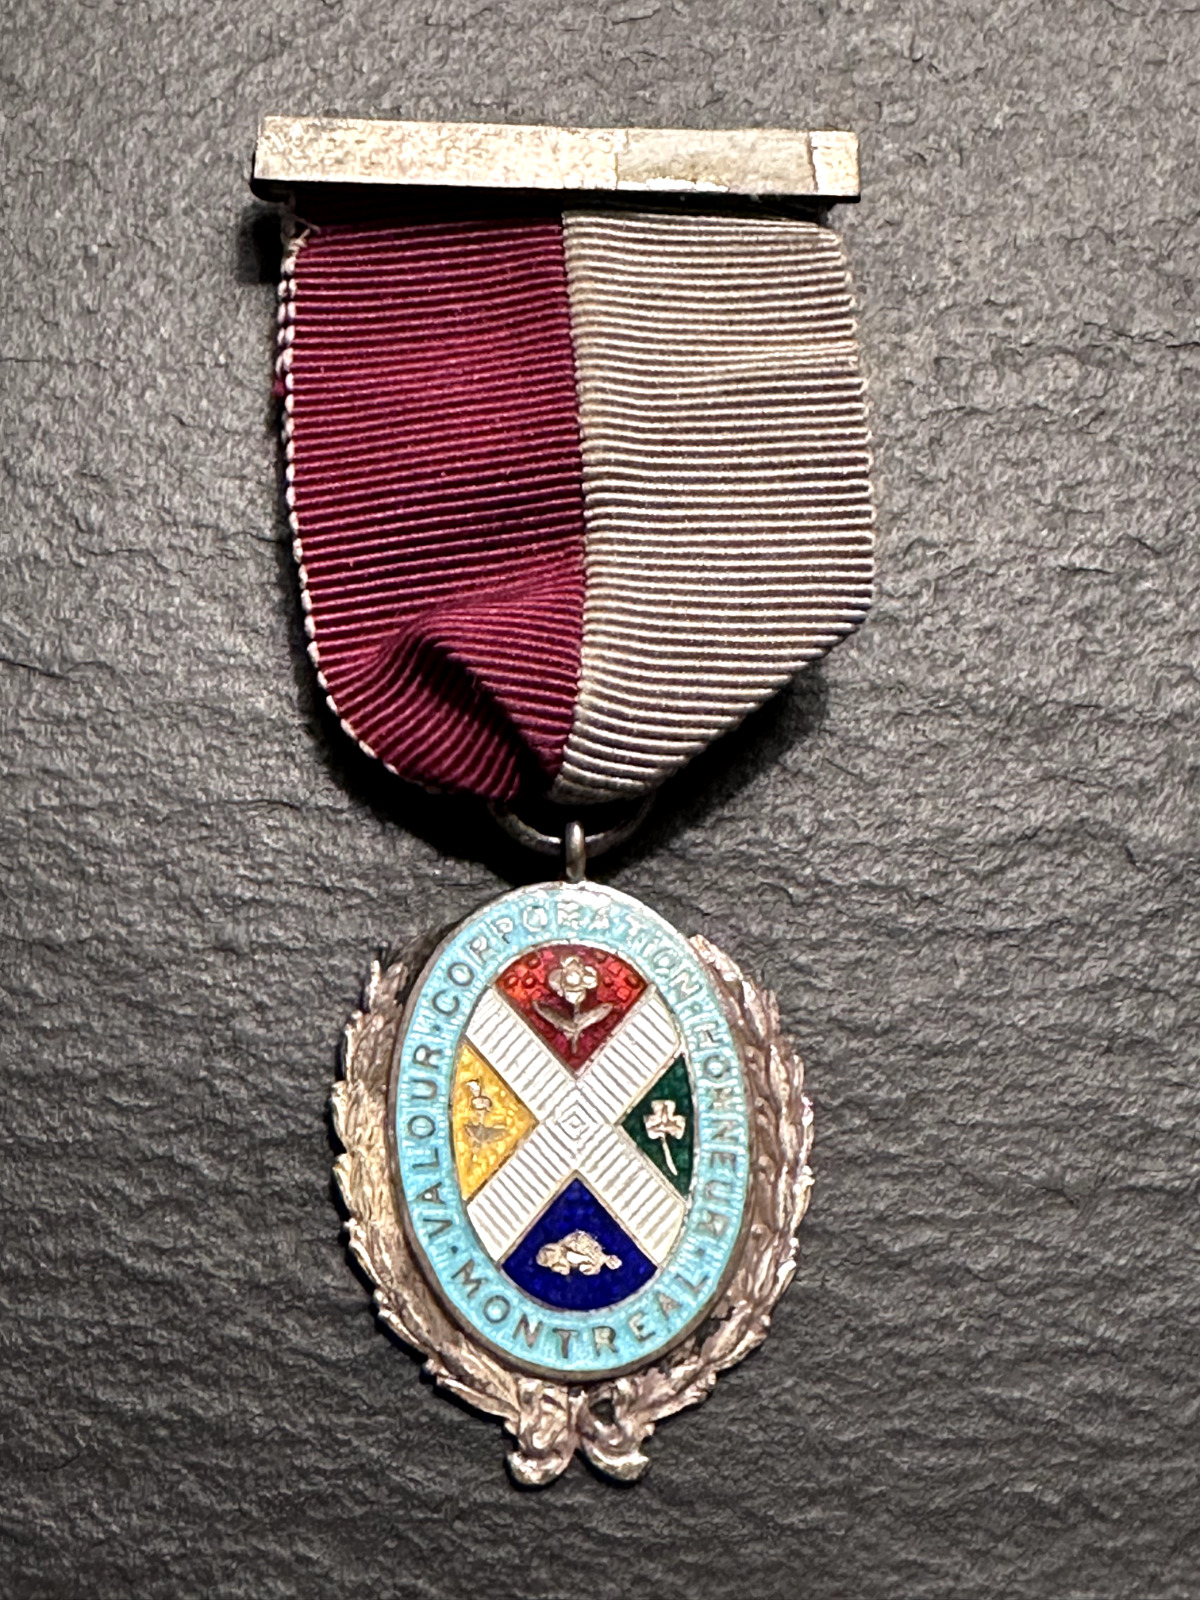 ANTIQUE MONTREAL CANADA VALOUR CORPORATION HONNEUR STERLING POLICE? MEDAL AWARD